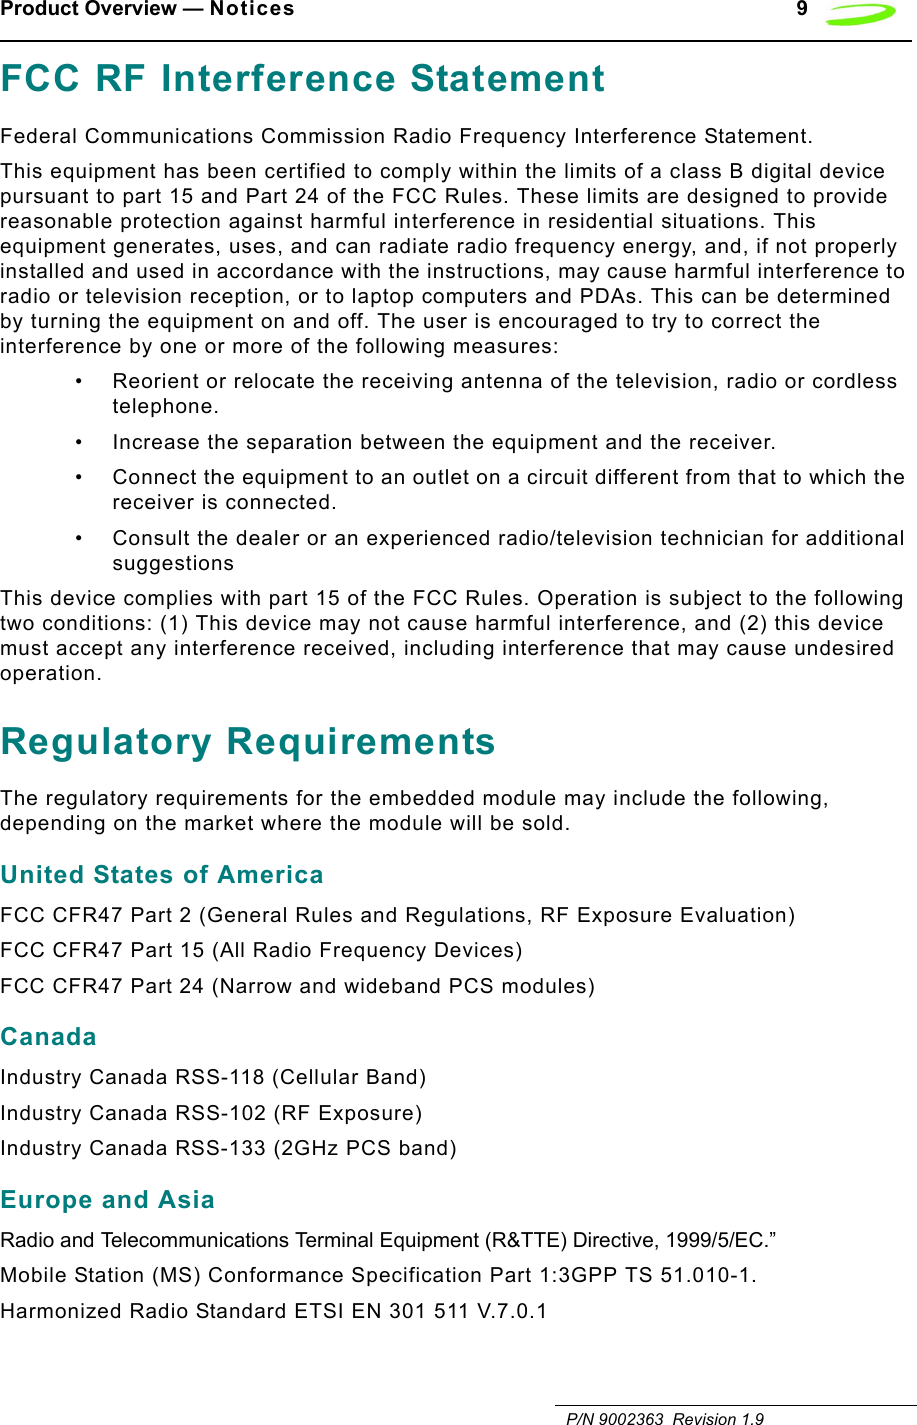 Product Overview — Notices 9   P/N 9002363  Revision 1.9FCC RF Interference StatementFederal Communications Commission Radio Frequency Interference Statement.This equipment has been certified to comply within the limits of a class B digital device pursuant to part 15 and Part 24 of the FCC Rules. These limits are designed to provide reasonable protection against harmful interference in residential situations. This equipment generates, uses, and can radiate radio frequency energy, and, if not properly installed and used in accordance with the instructions, may cause harmful interference to radio or television reception, or to laptop computers and PDAs. This can be determined by turning the equipment on and off. The user is encouraged to try to correct the interference by one or more of the following measures:• Reorient or relocate the receiving antenna of the television, radio or cordless telephone.• Increase the separation between the equipment and the receiver.• Connect the equipment to an outlet on a circuit different from that to which the receiver is connected.• Consult the dealer or an experienced radio/television technician for additional suggestionsThis device complies with part 15 of the FCC Rules. Operation is subject to the following two conditions: (1) This device may not cause harmful interference, and (2) this device must accept any interference received, including interference that may cause undesired operation.Regulatory RequirementsThe regulatory requirements for the embedded module may include the following, depending on the market where the module will be sold.United States of AmericaFCC CFR47 Part 2 (General Rules and Regulations, RF Exposure Evaluation)FCC CFR47 Part 15 (All Radio Frequency Devices)FCC CFR47 Part 24 (Narrow and wideband PCS modules)CanadaIndustry Canada RSS-118 (Cellular Band)Industry Canada RSS-102 (RF Exposure)Industry Canada RSS-133 (2GHz PCS band)Europe and AsiaRadio and Telecommunications Terminal Equipment (R&amp;TTE) Directive, 1999/5/EC.”Mobile Station (MS) Conformance Specification Part 1:3GPP TS 51.010-1.Harmonized Radio Standard ETSI EN 301 511 V.7.0.1